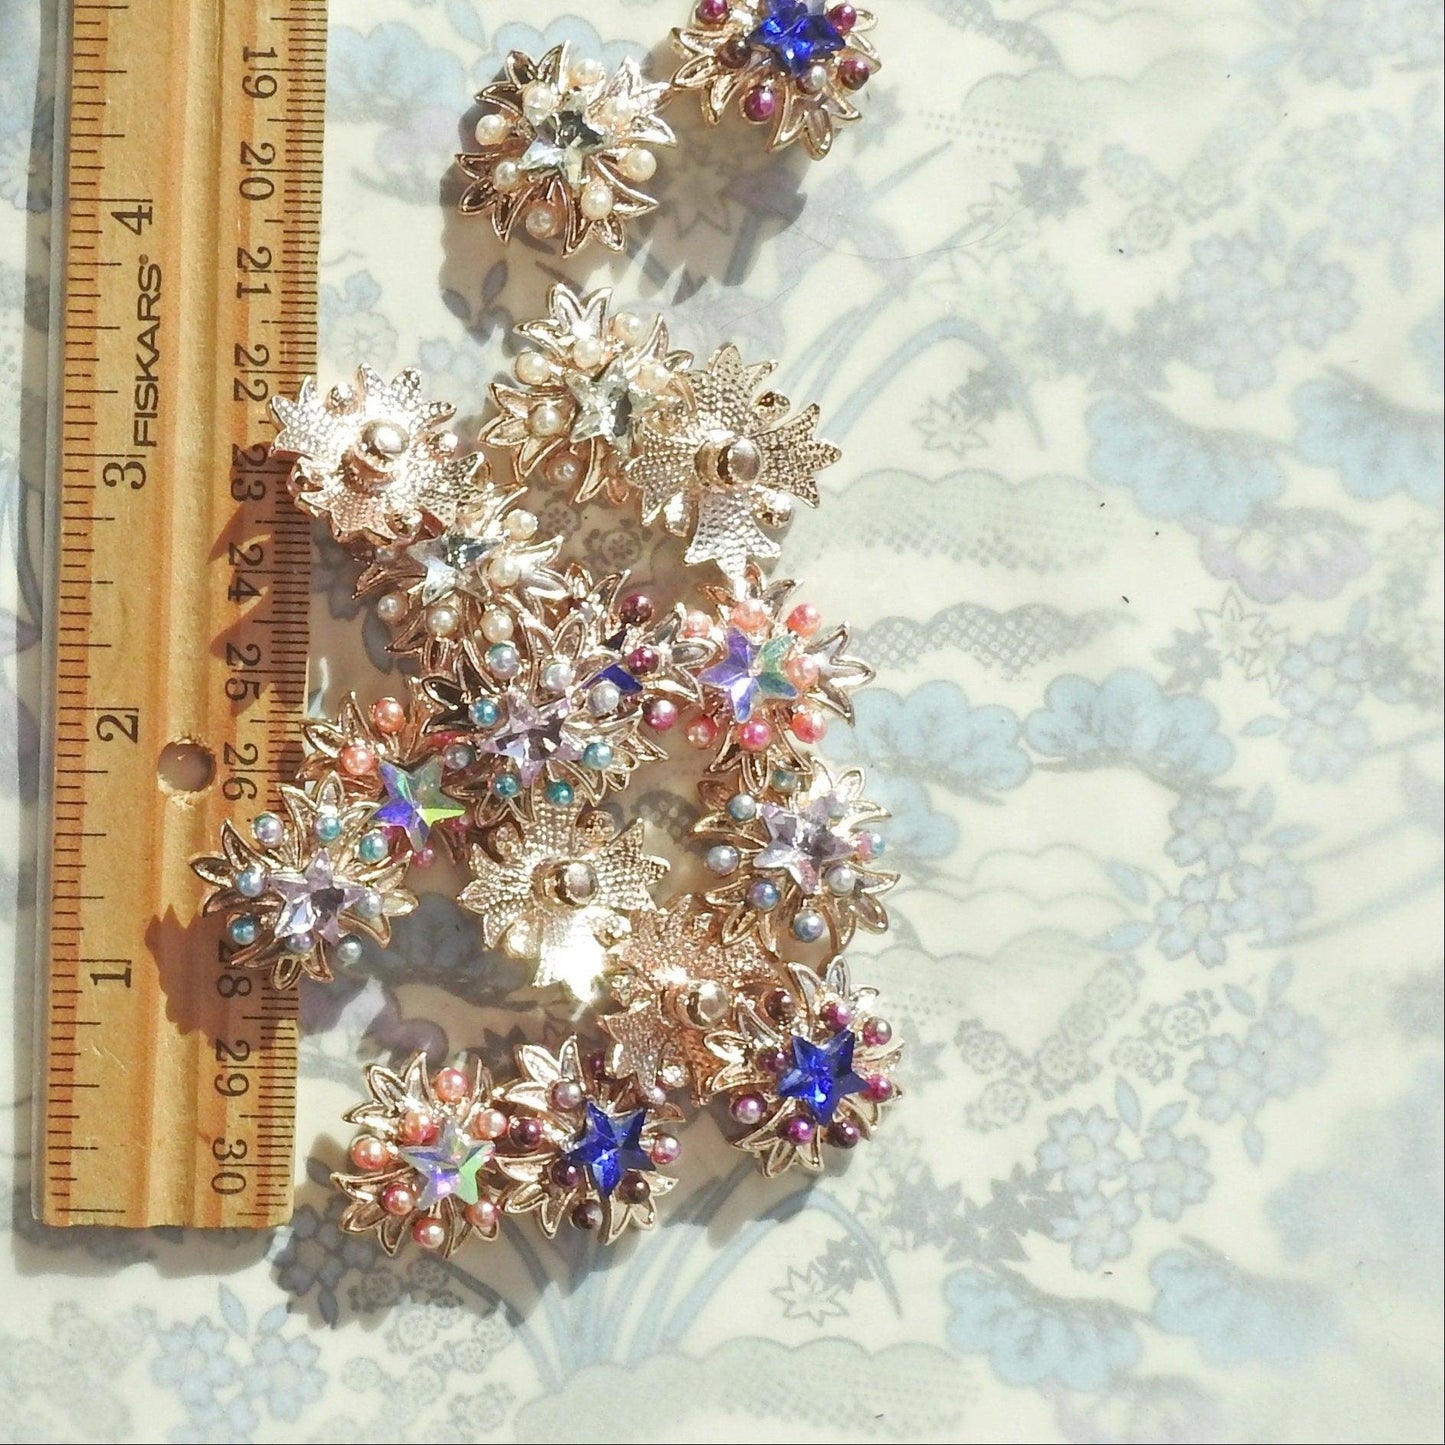 Large buttons lot of 18 fancy snaps cap, star-shaped with mixed colors of blue, pink and purple, for button bouquet and jar embellishments